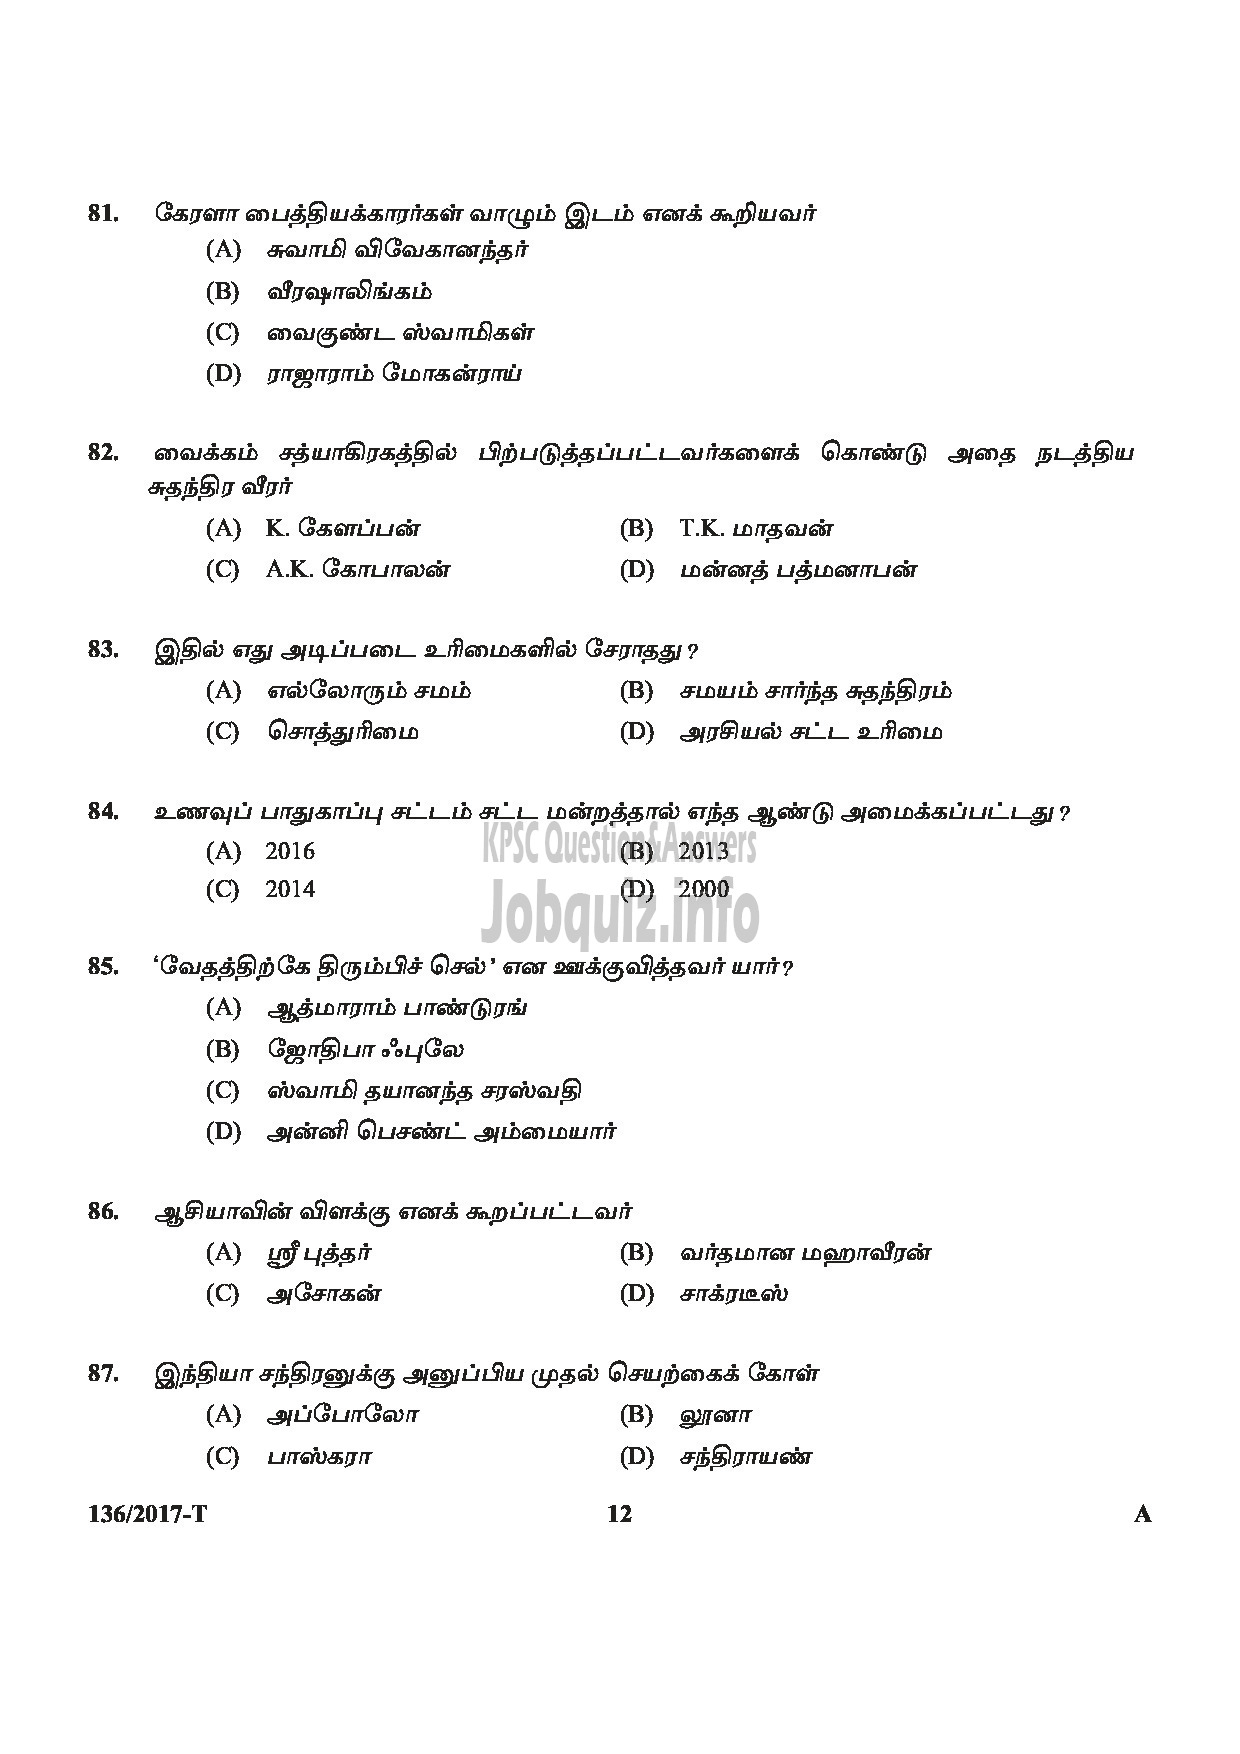 Kerala PSC Question Paper - METER READER/SPOT BILLER SPECIAL RECRUITMENT FROM AMONG ST ONLY MEDIUM OF QUESTION TAMIL-12